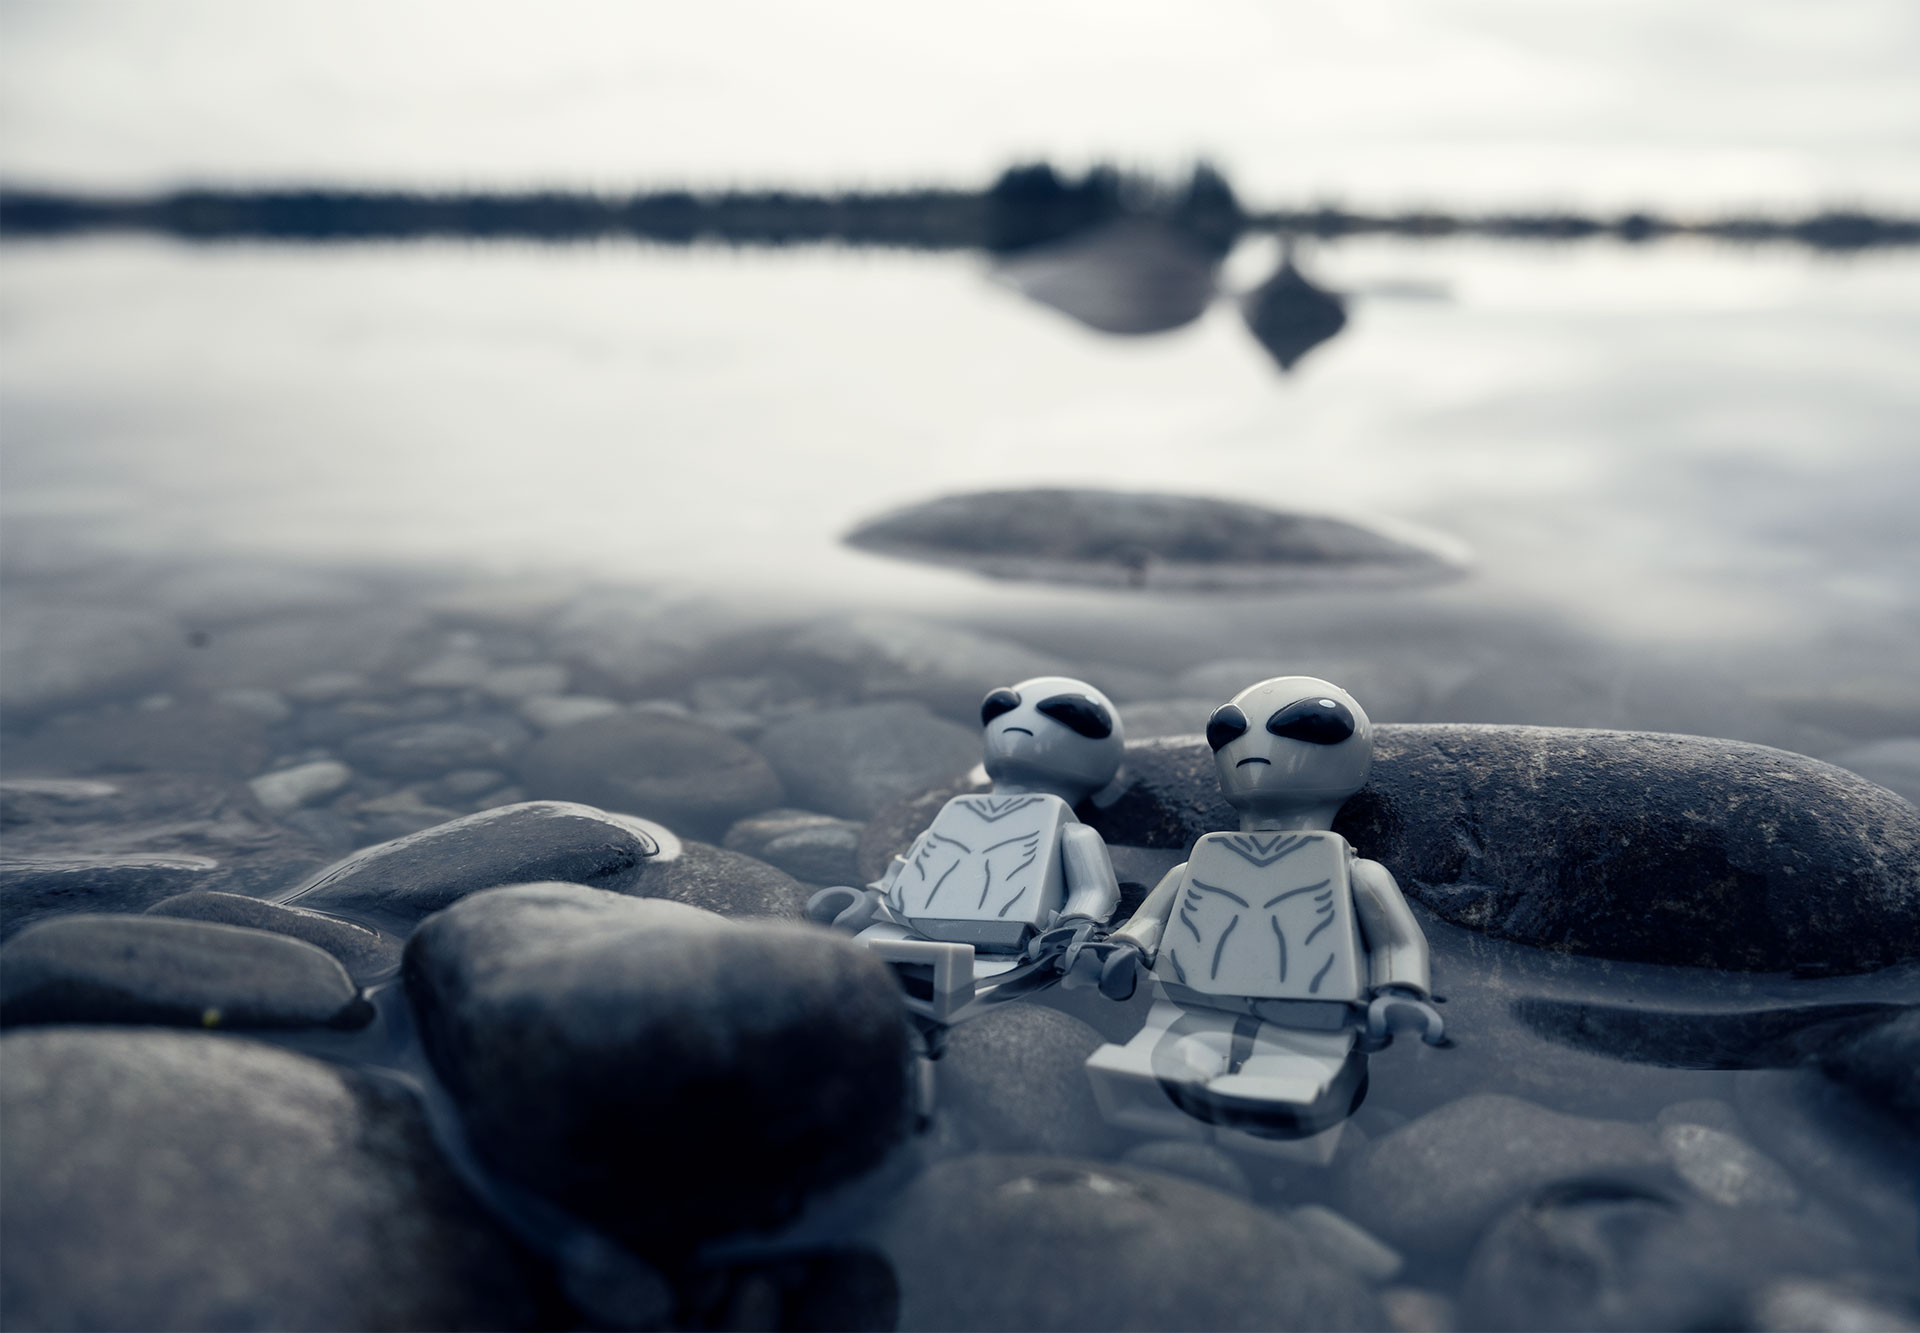 Lego Aliens resting by a lake